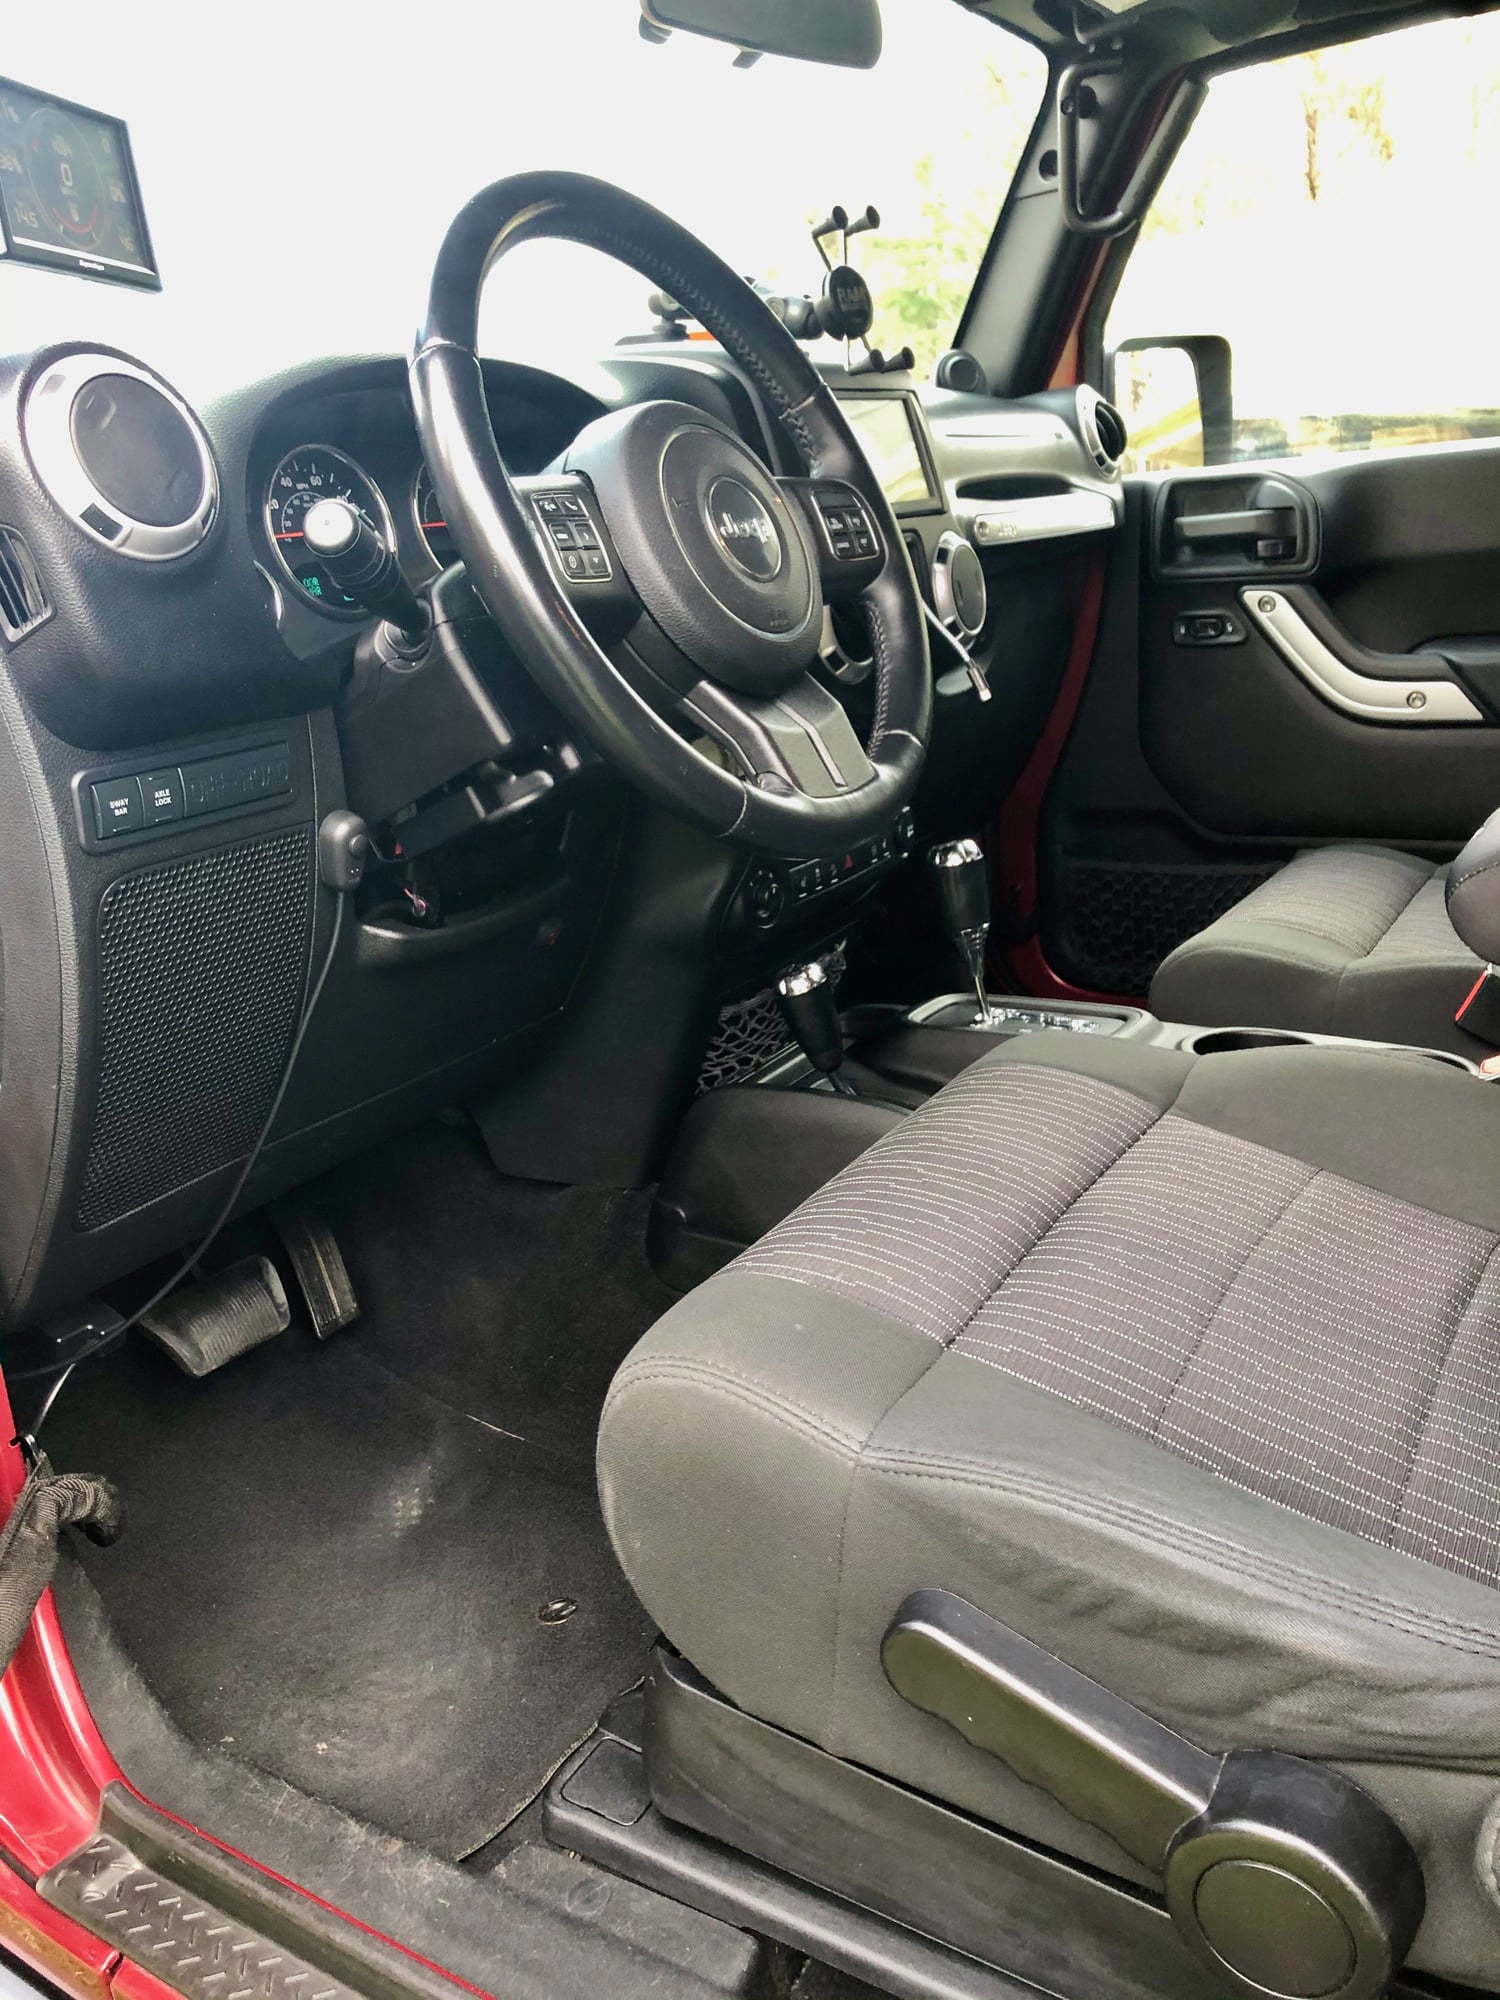 2012 Jeep Wrangler - 2012 Rubicon w SteerSmarts, MetalCloak and more... - Used - VIN 1C4HJWCGXCL19899 - 6 cyl - 4WD - Automatic - SUV - Red - Blacksburg, VA 24060, United States